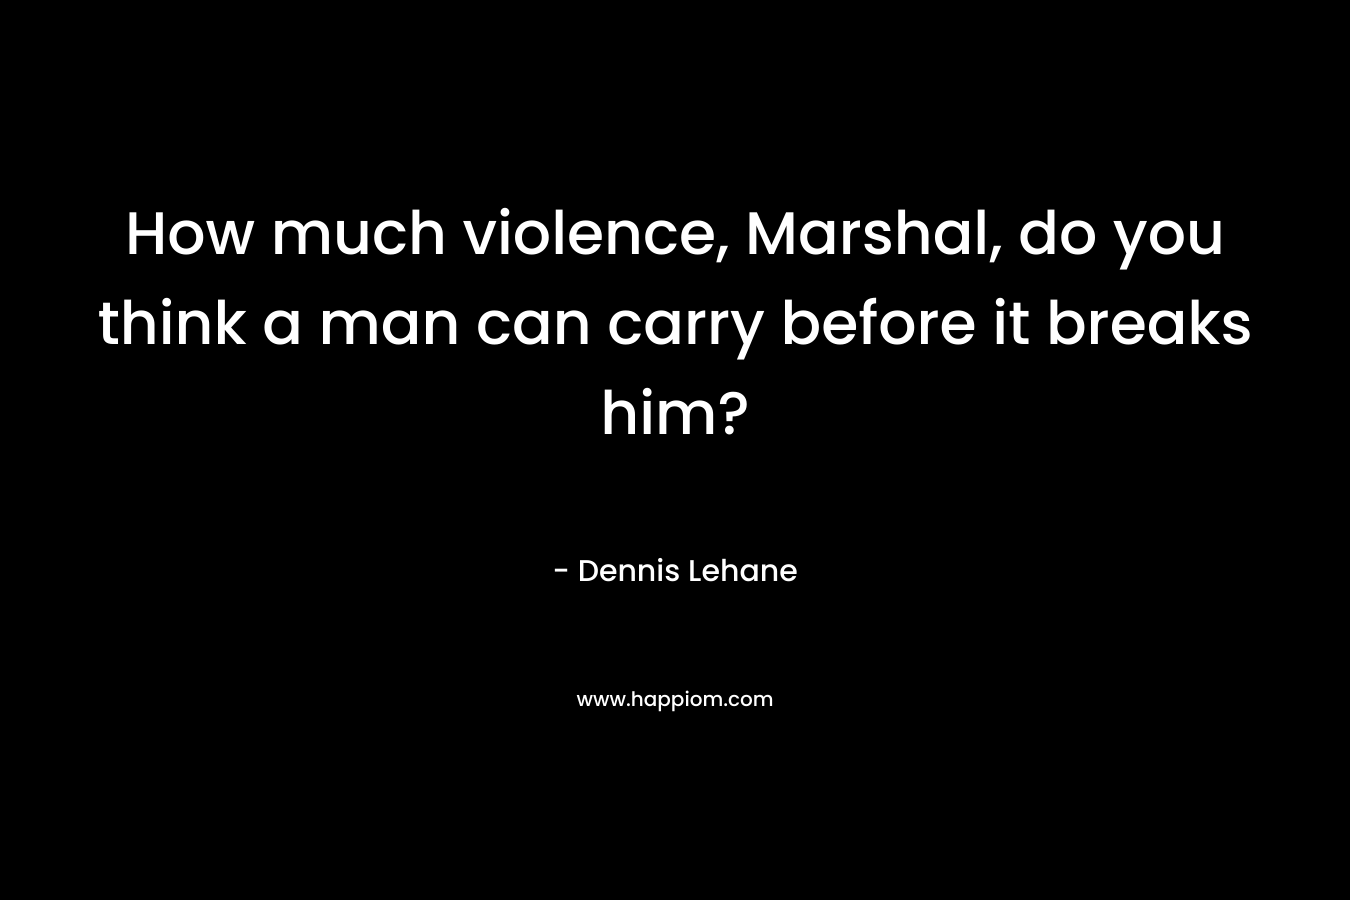 How much violence, Marshal, do you think a man can carry before it breaks him?